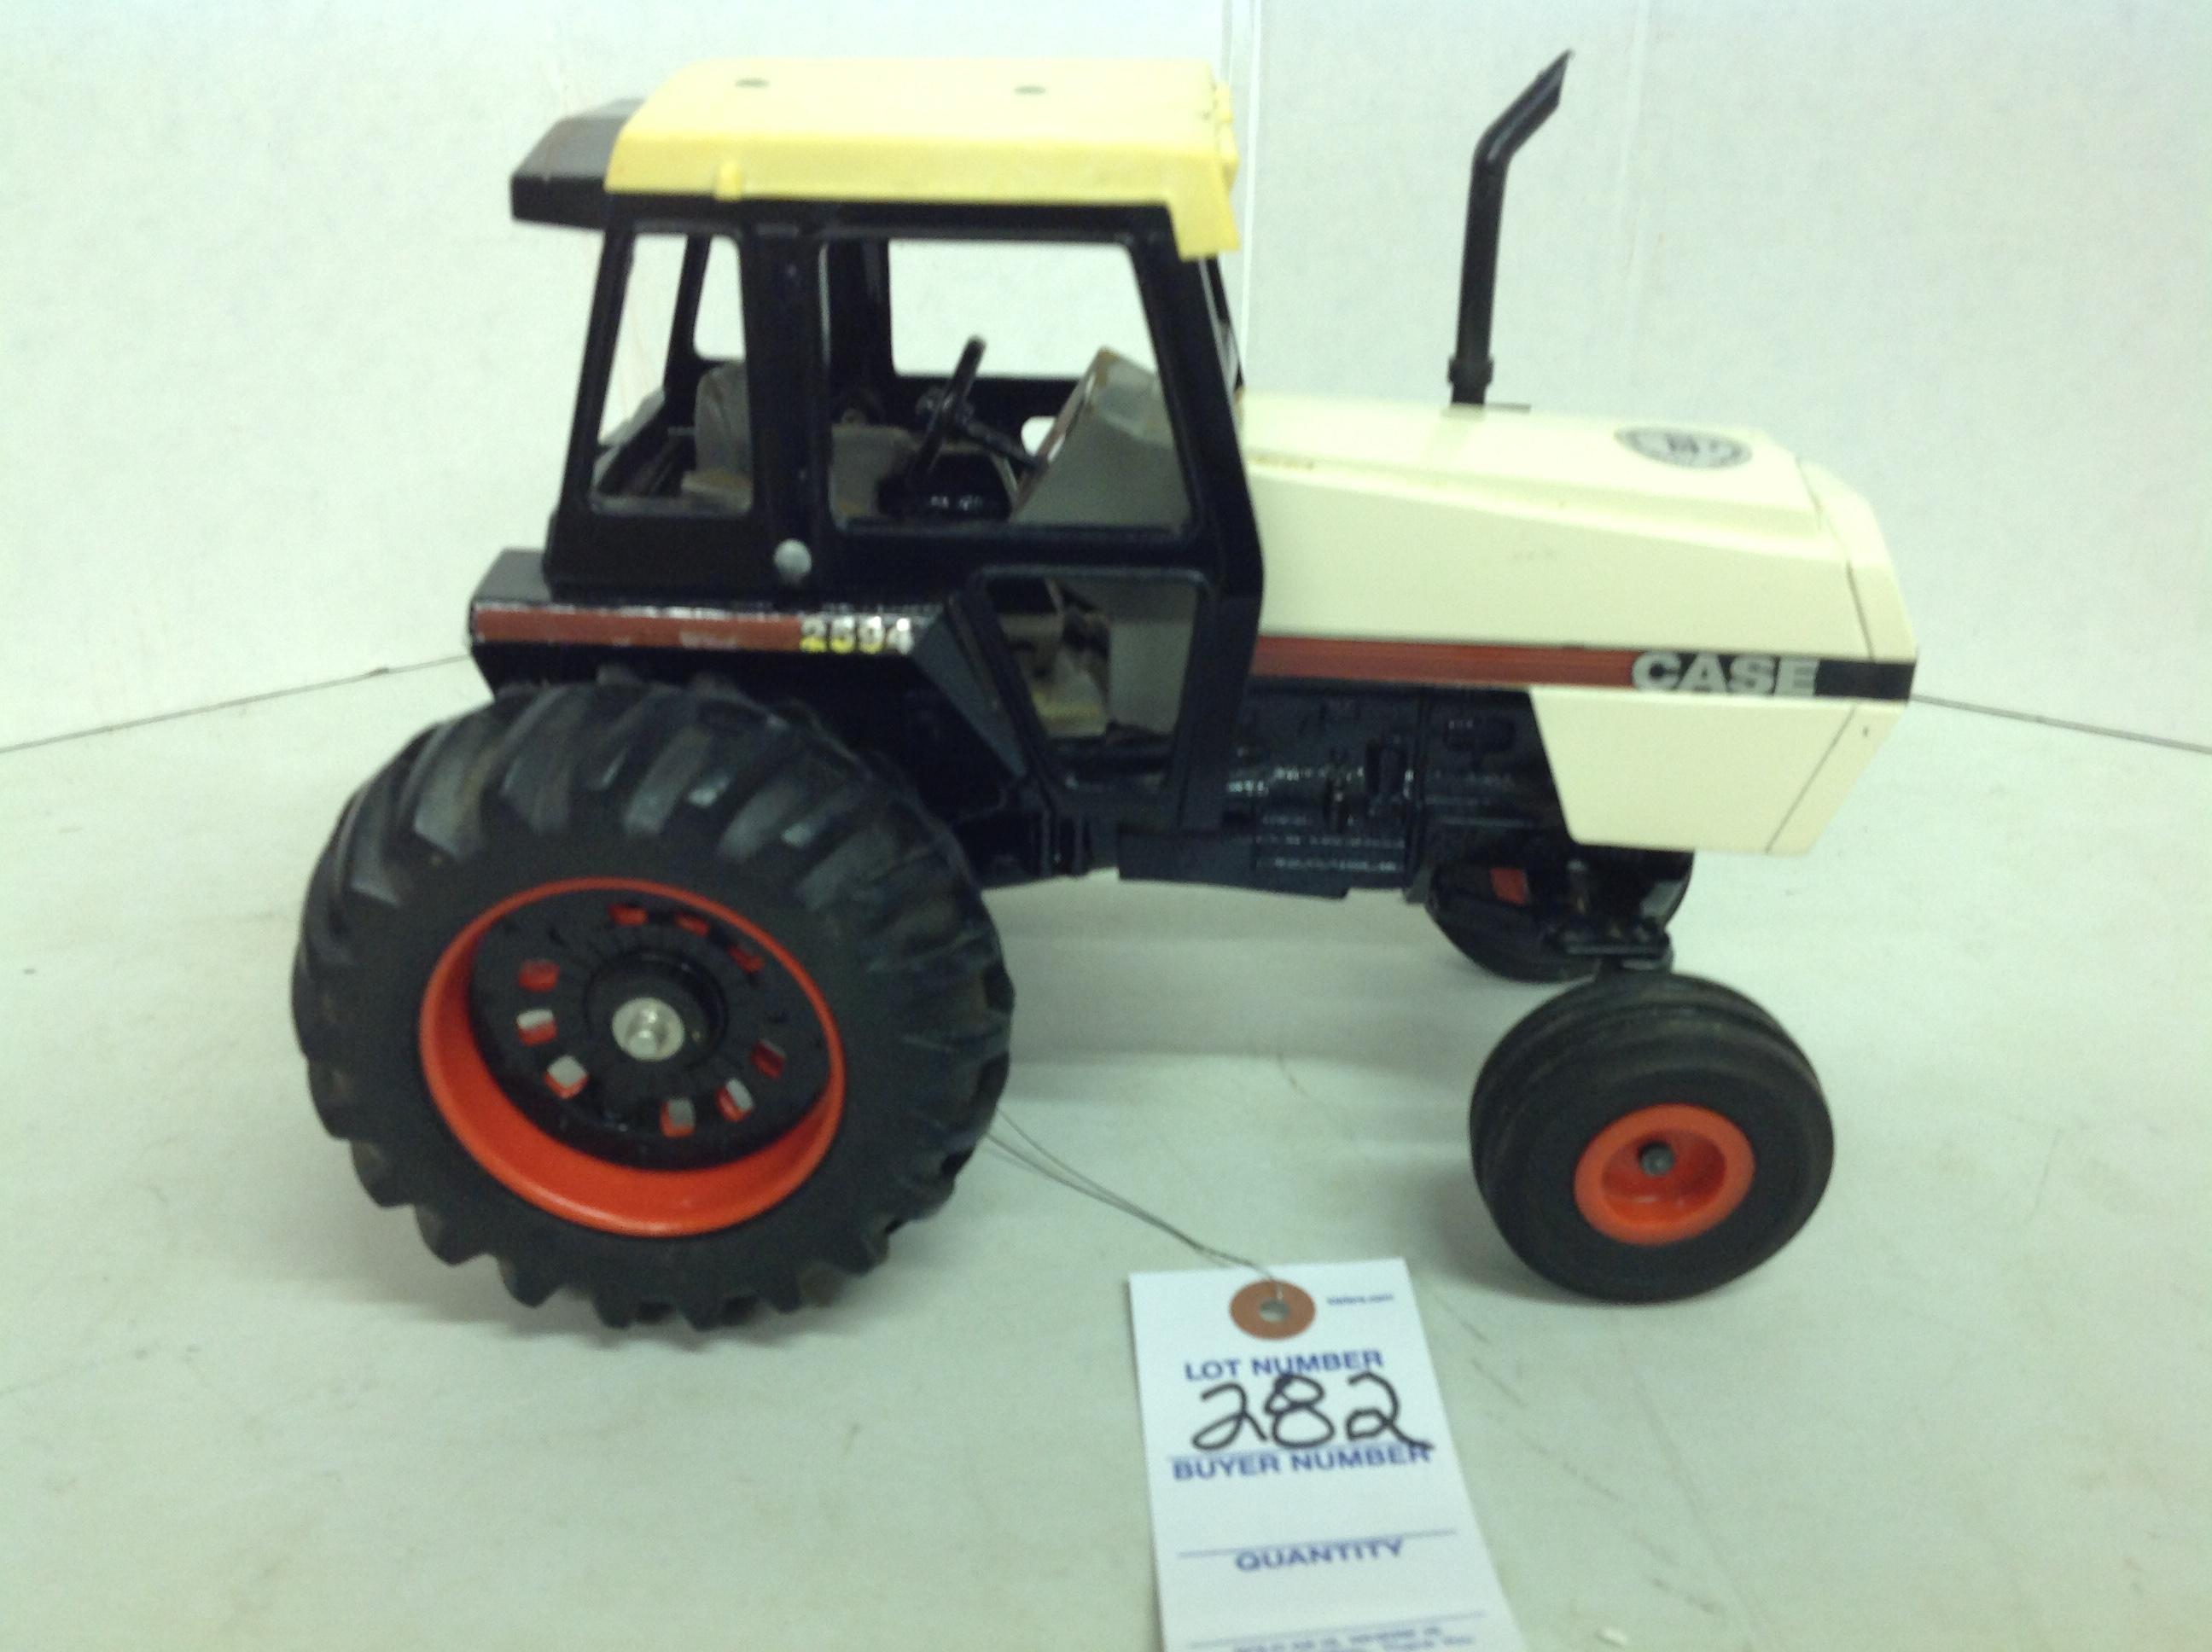 Case 2594 tractor, 1984 Collector Series